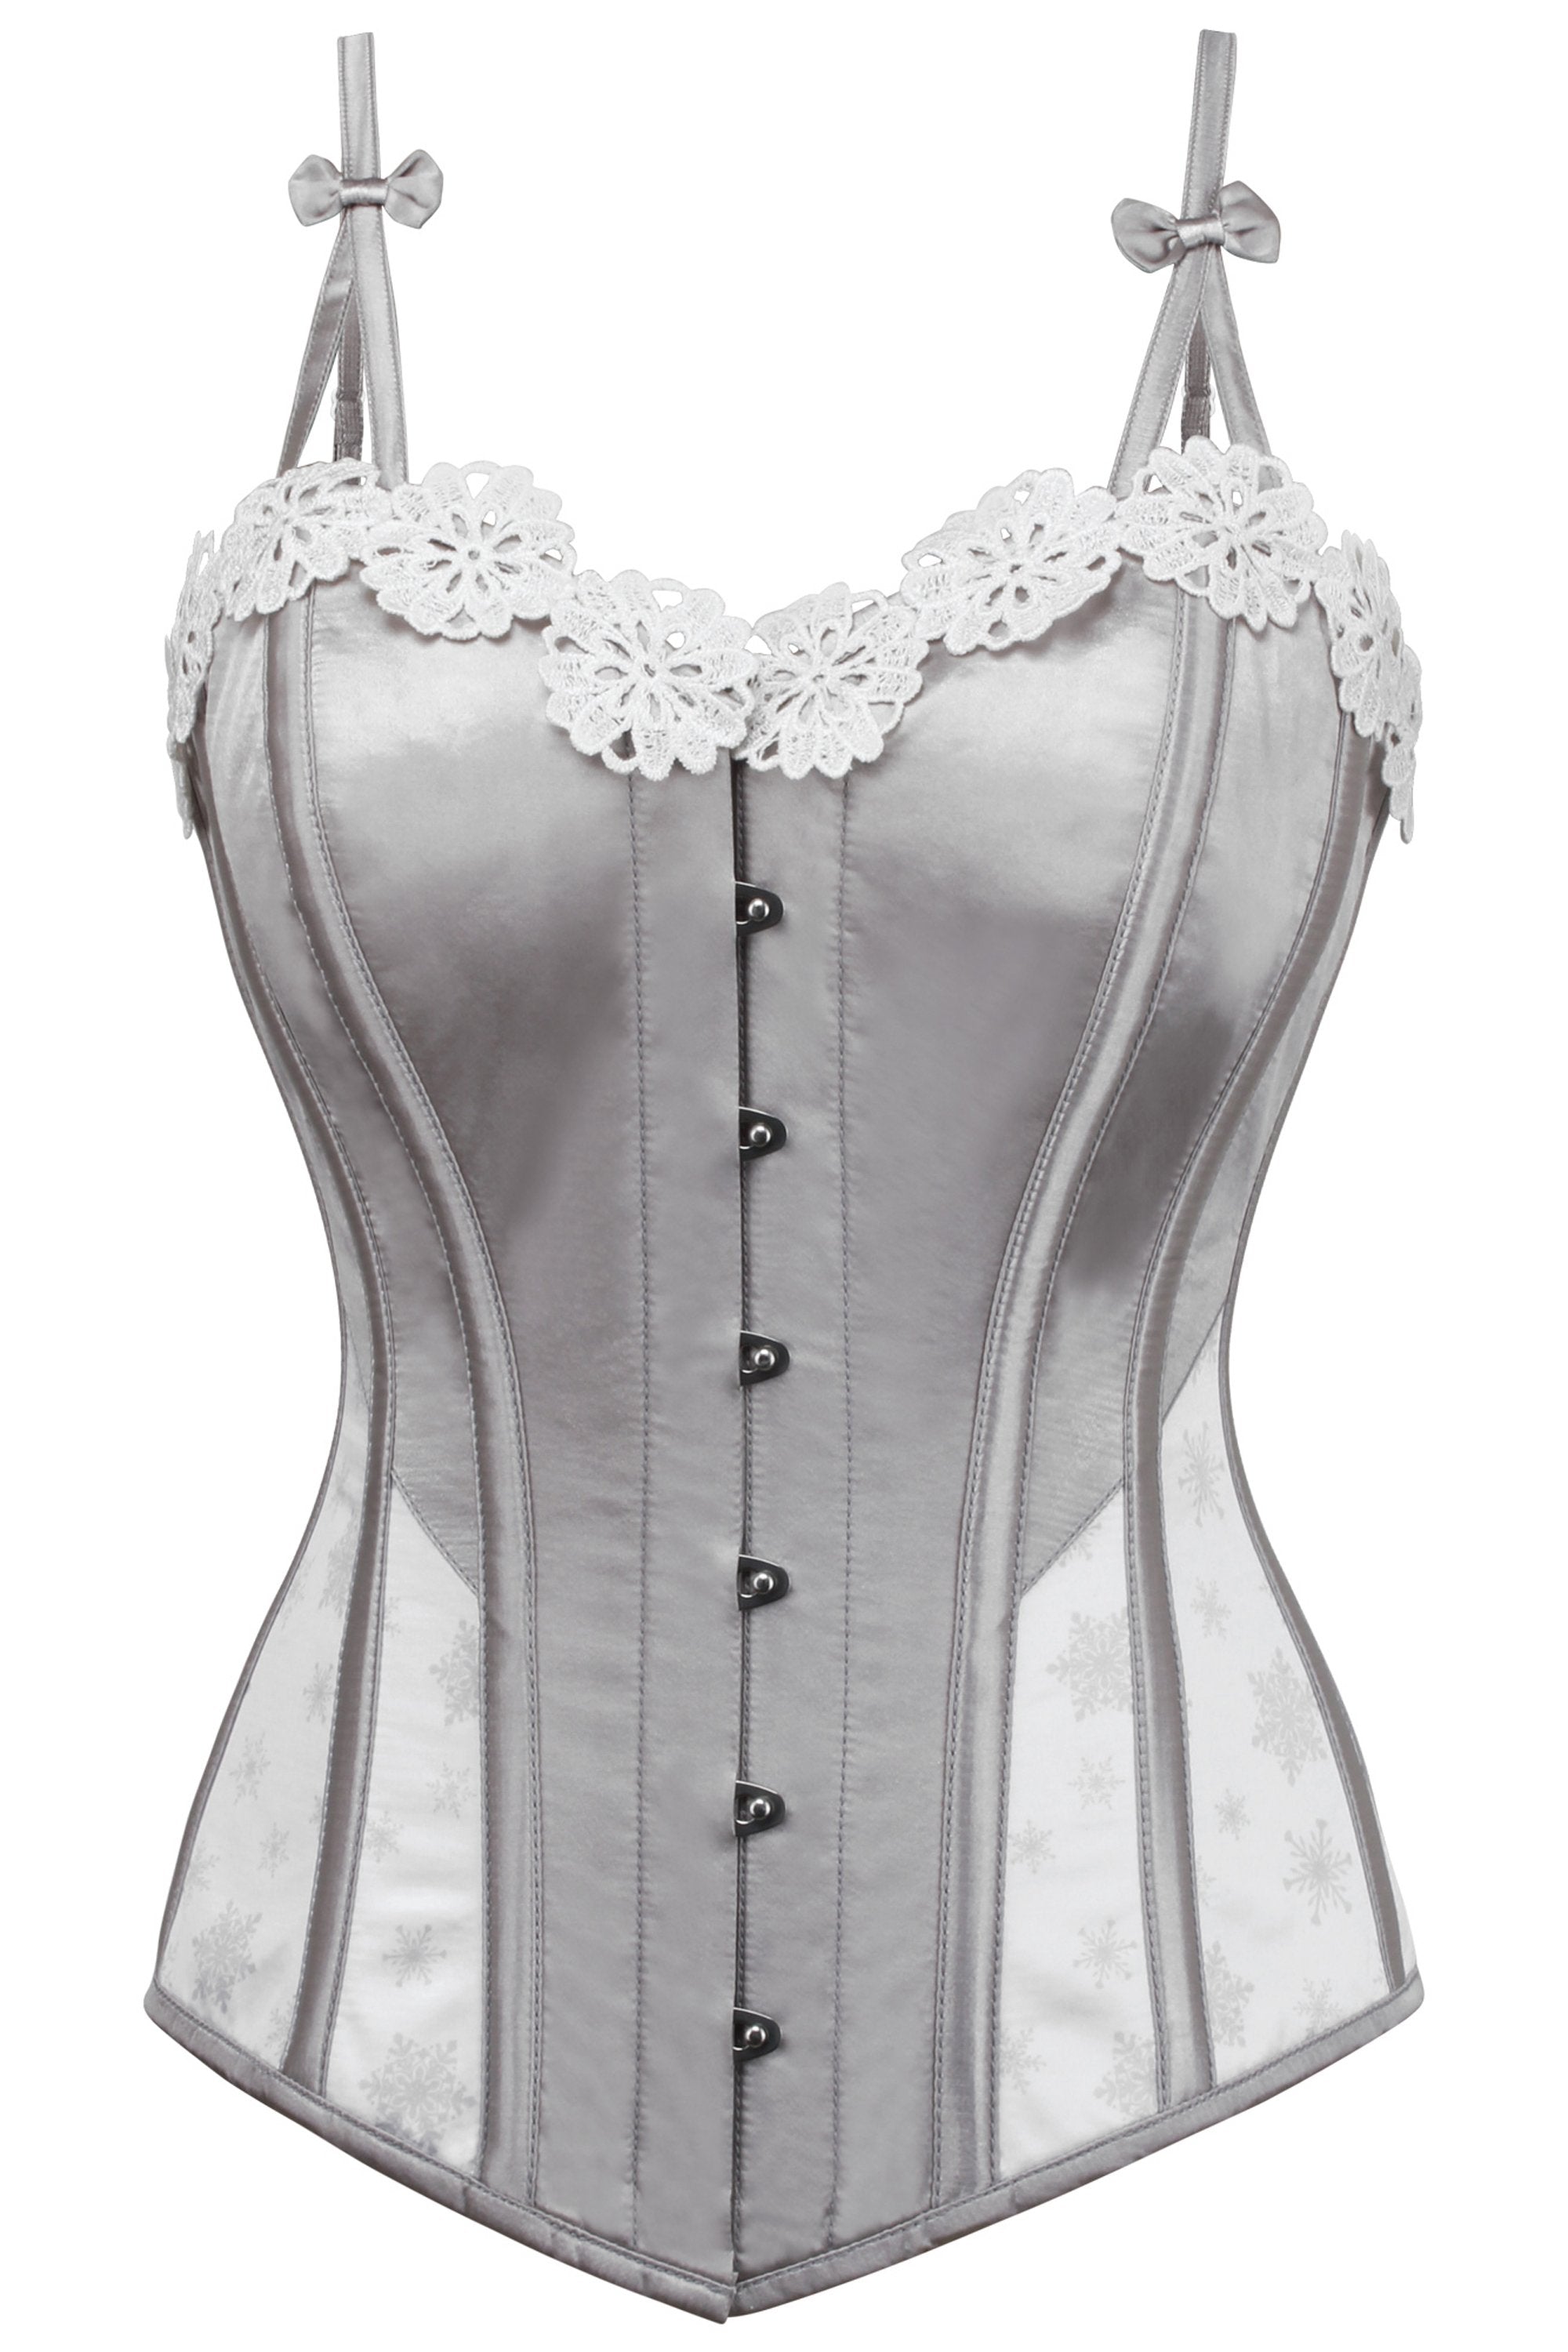 Vintage embroidered corset 32-36 C cup